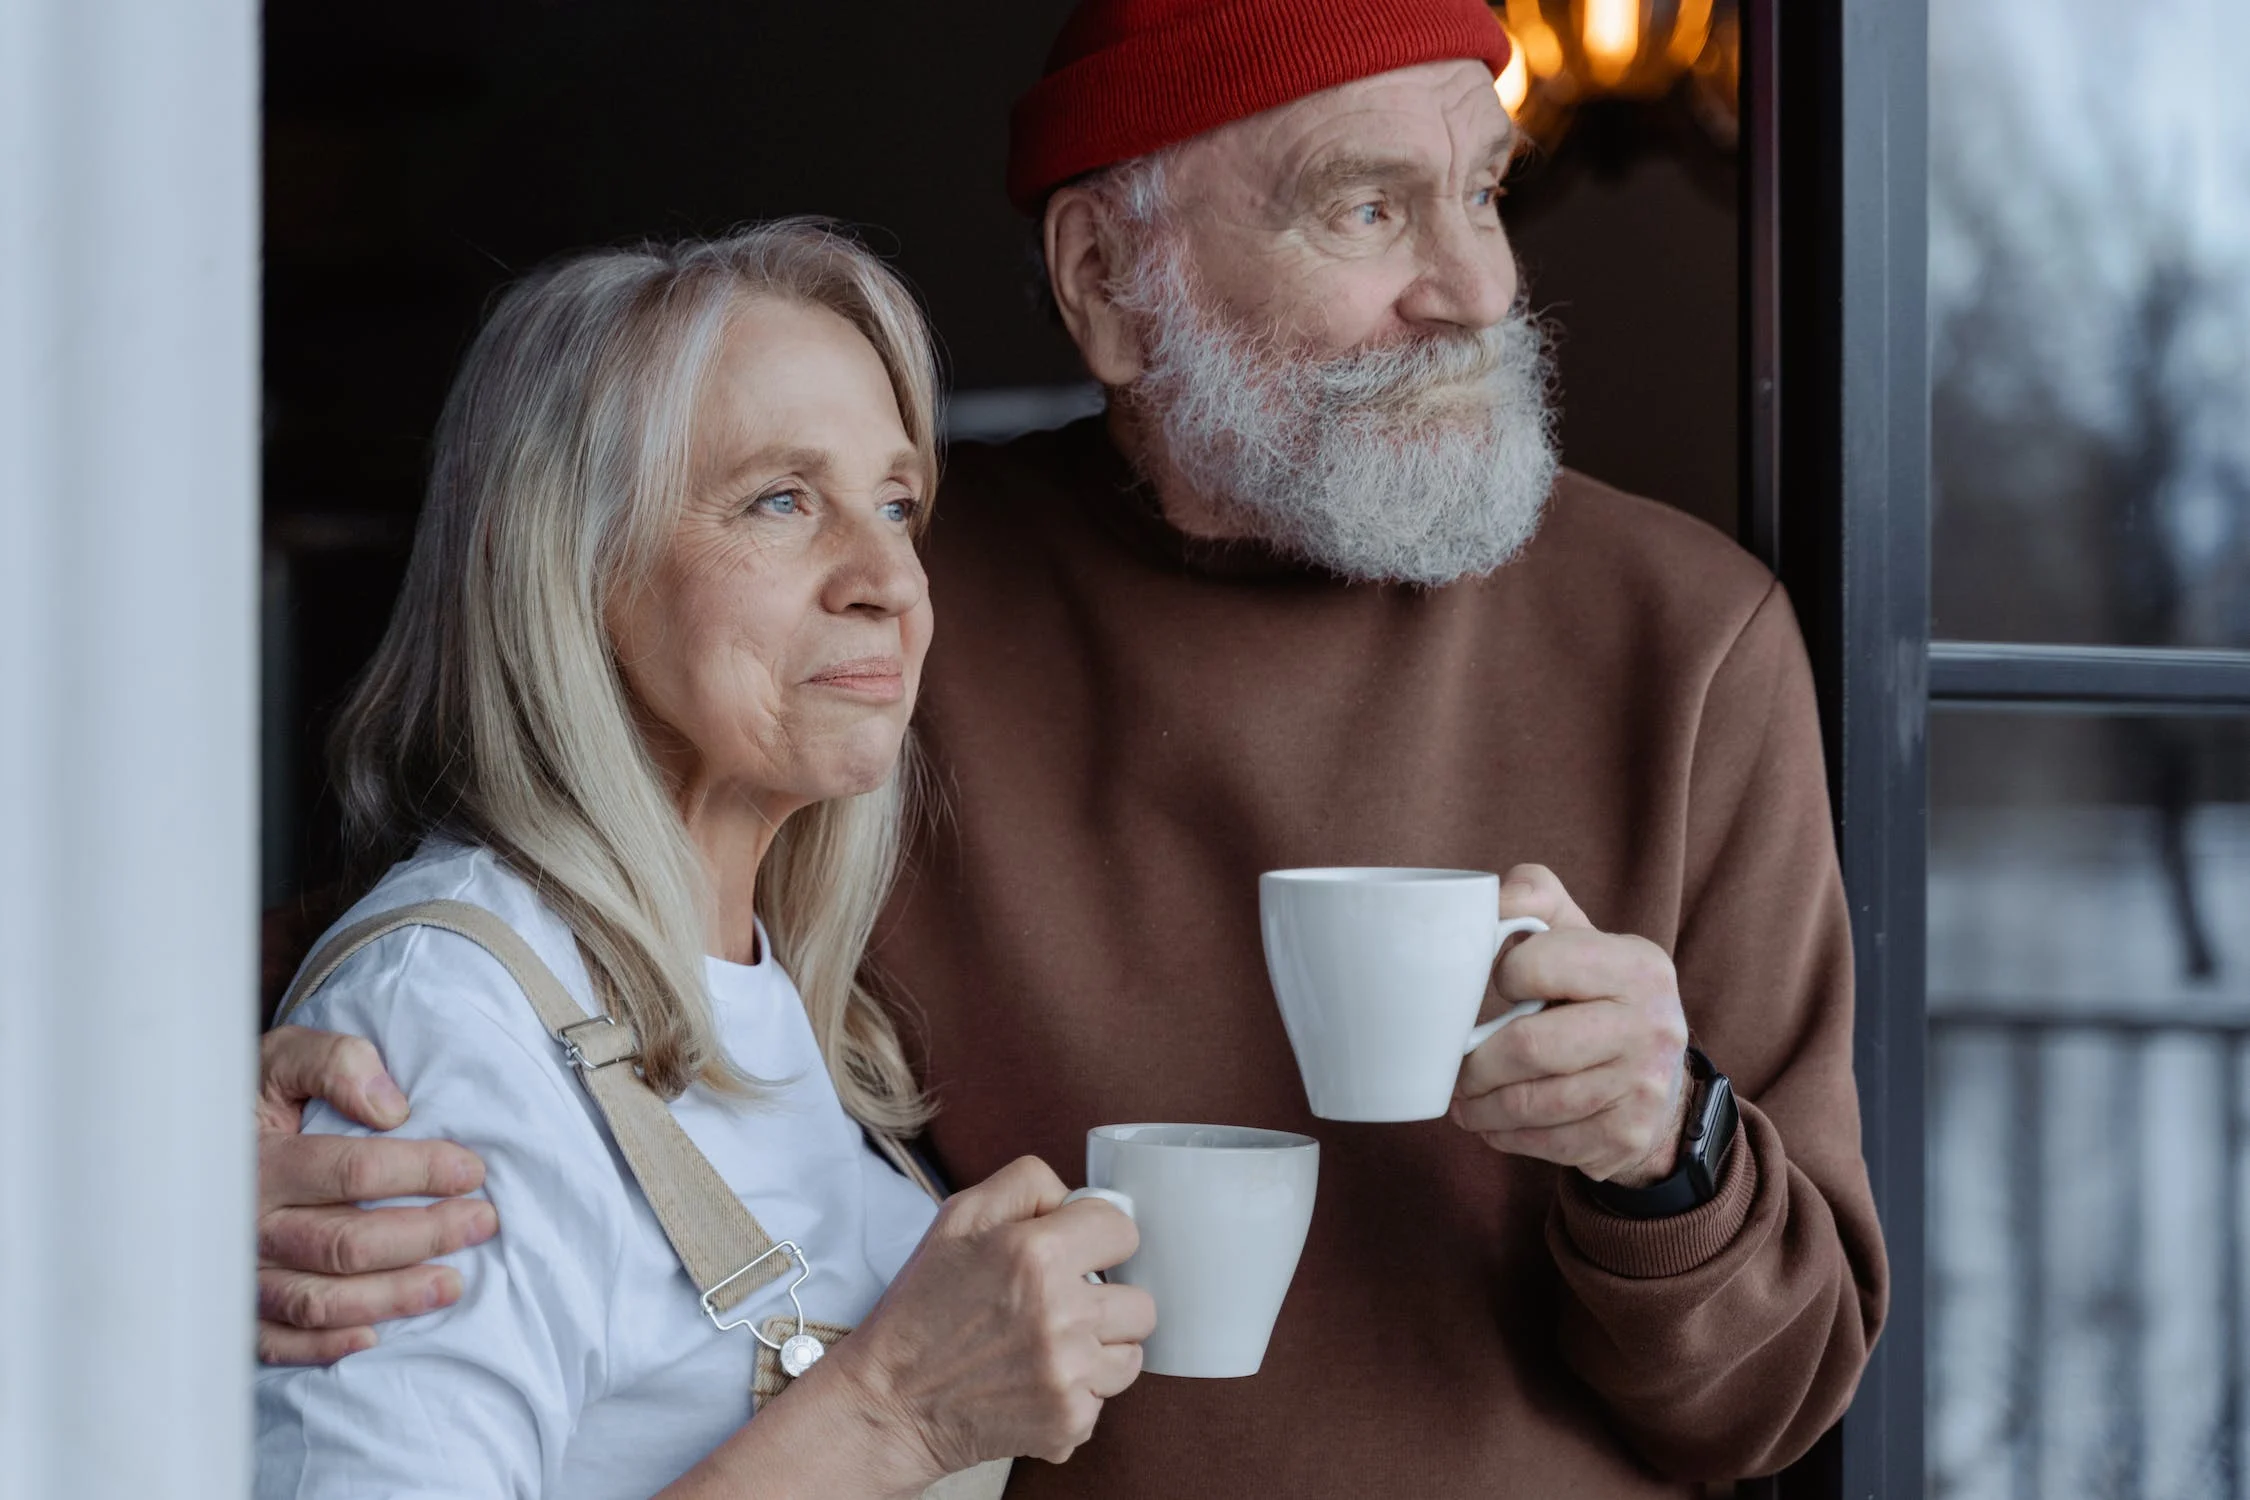 Older man and woman looking into the distance and drinking coffee